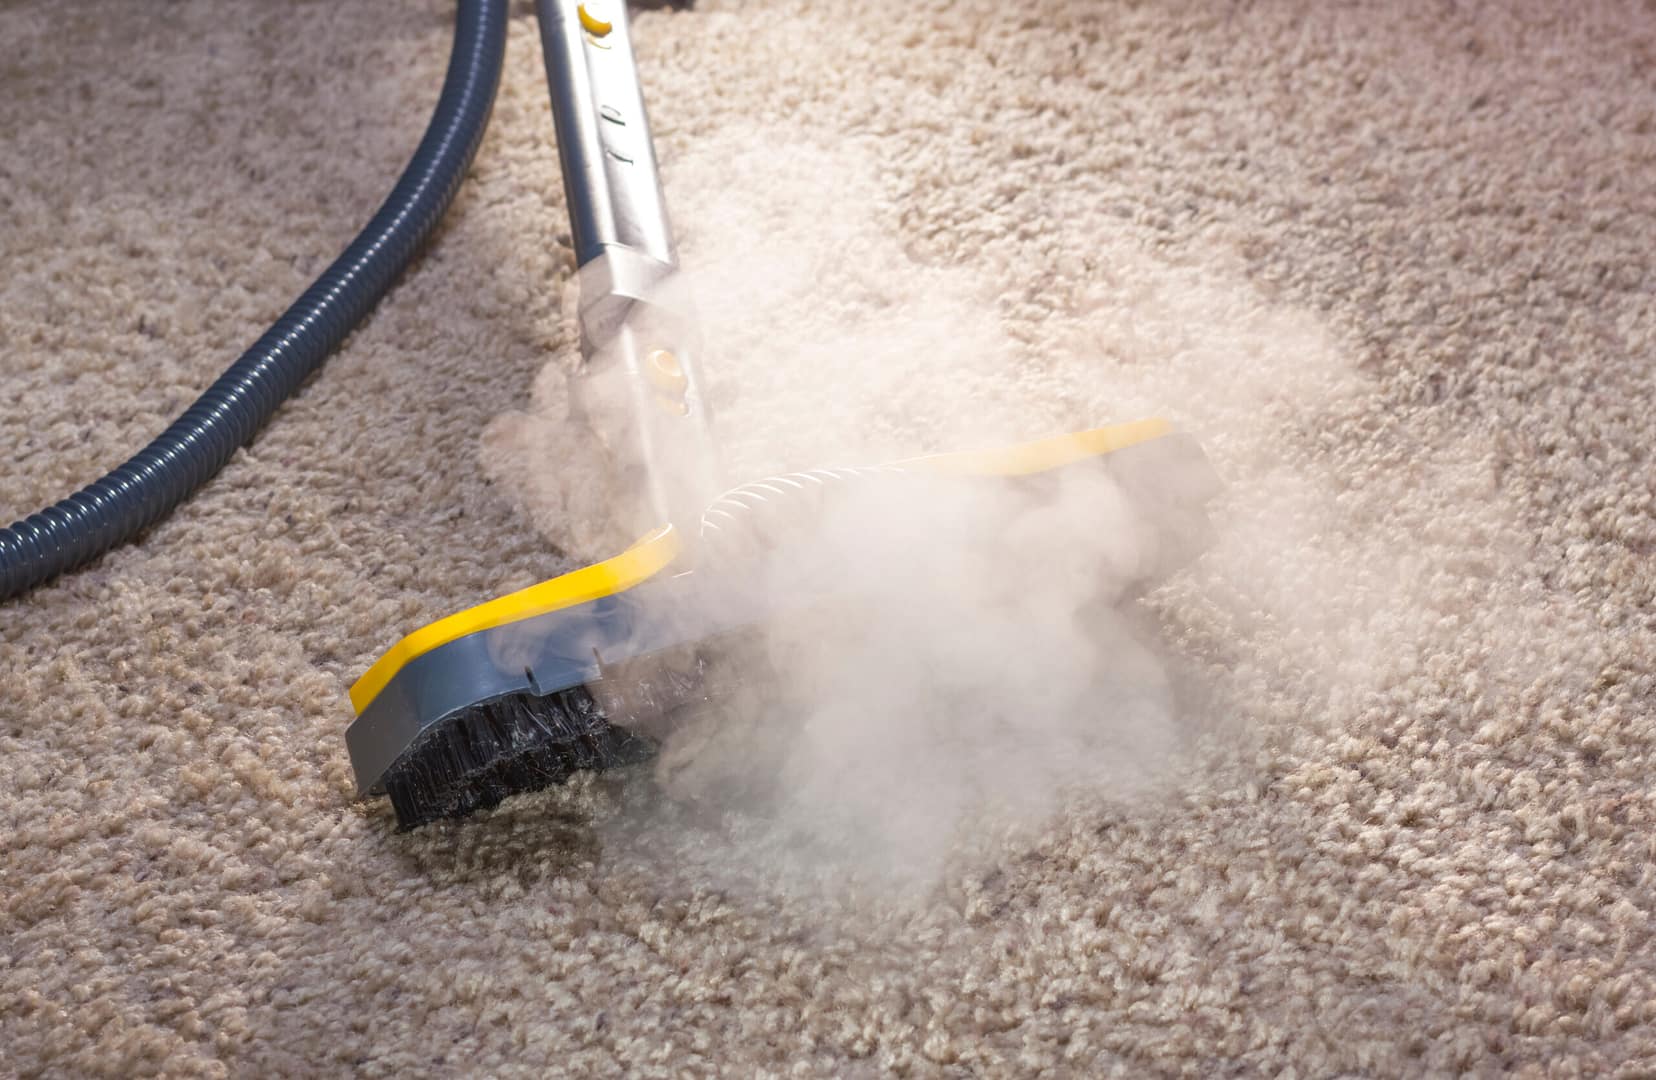 Closeup of a carpet cleaning machine steaming a carpet. Effective marketing of your cleaning services means more visibility in search results, a bigger brand online, and more customers in your business.